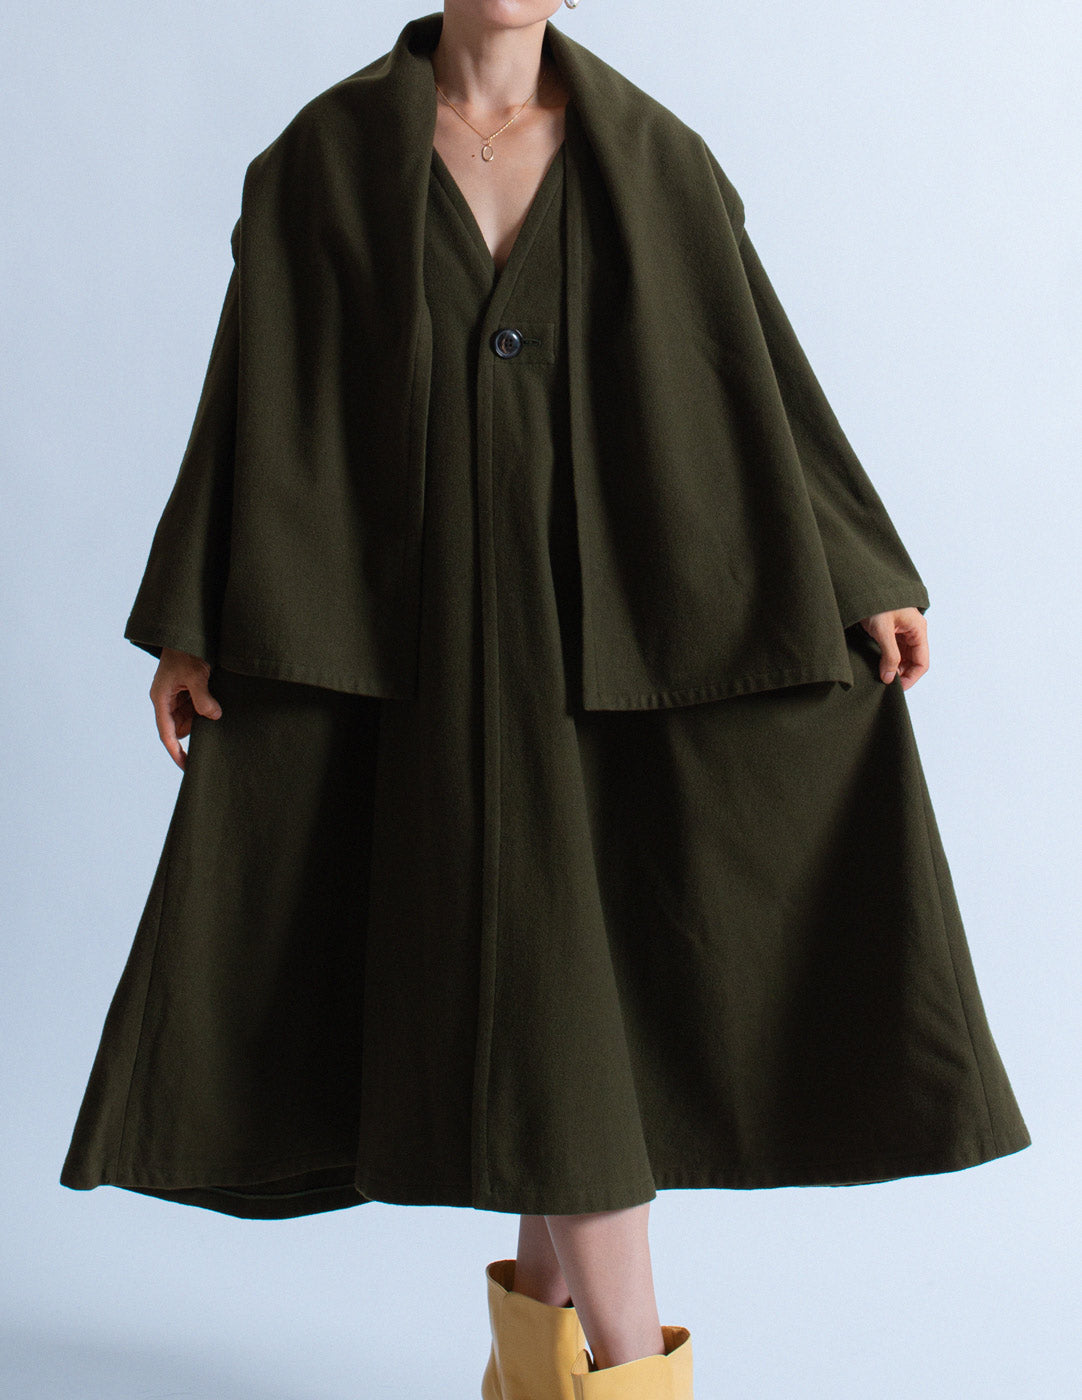 Y's olive wool coat with attached scarf front detail